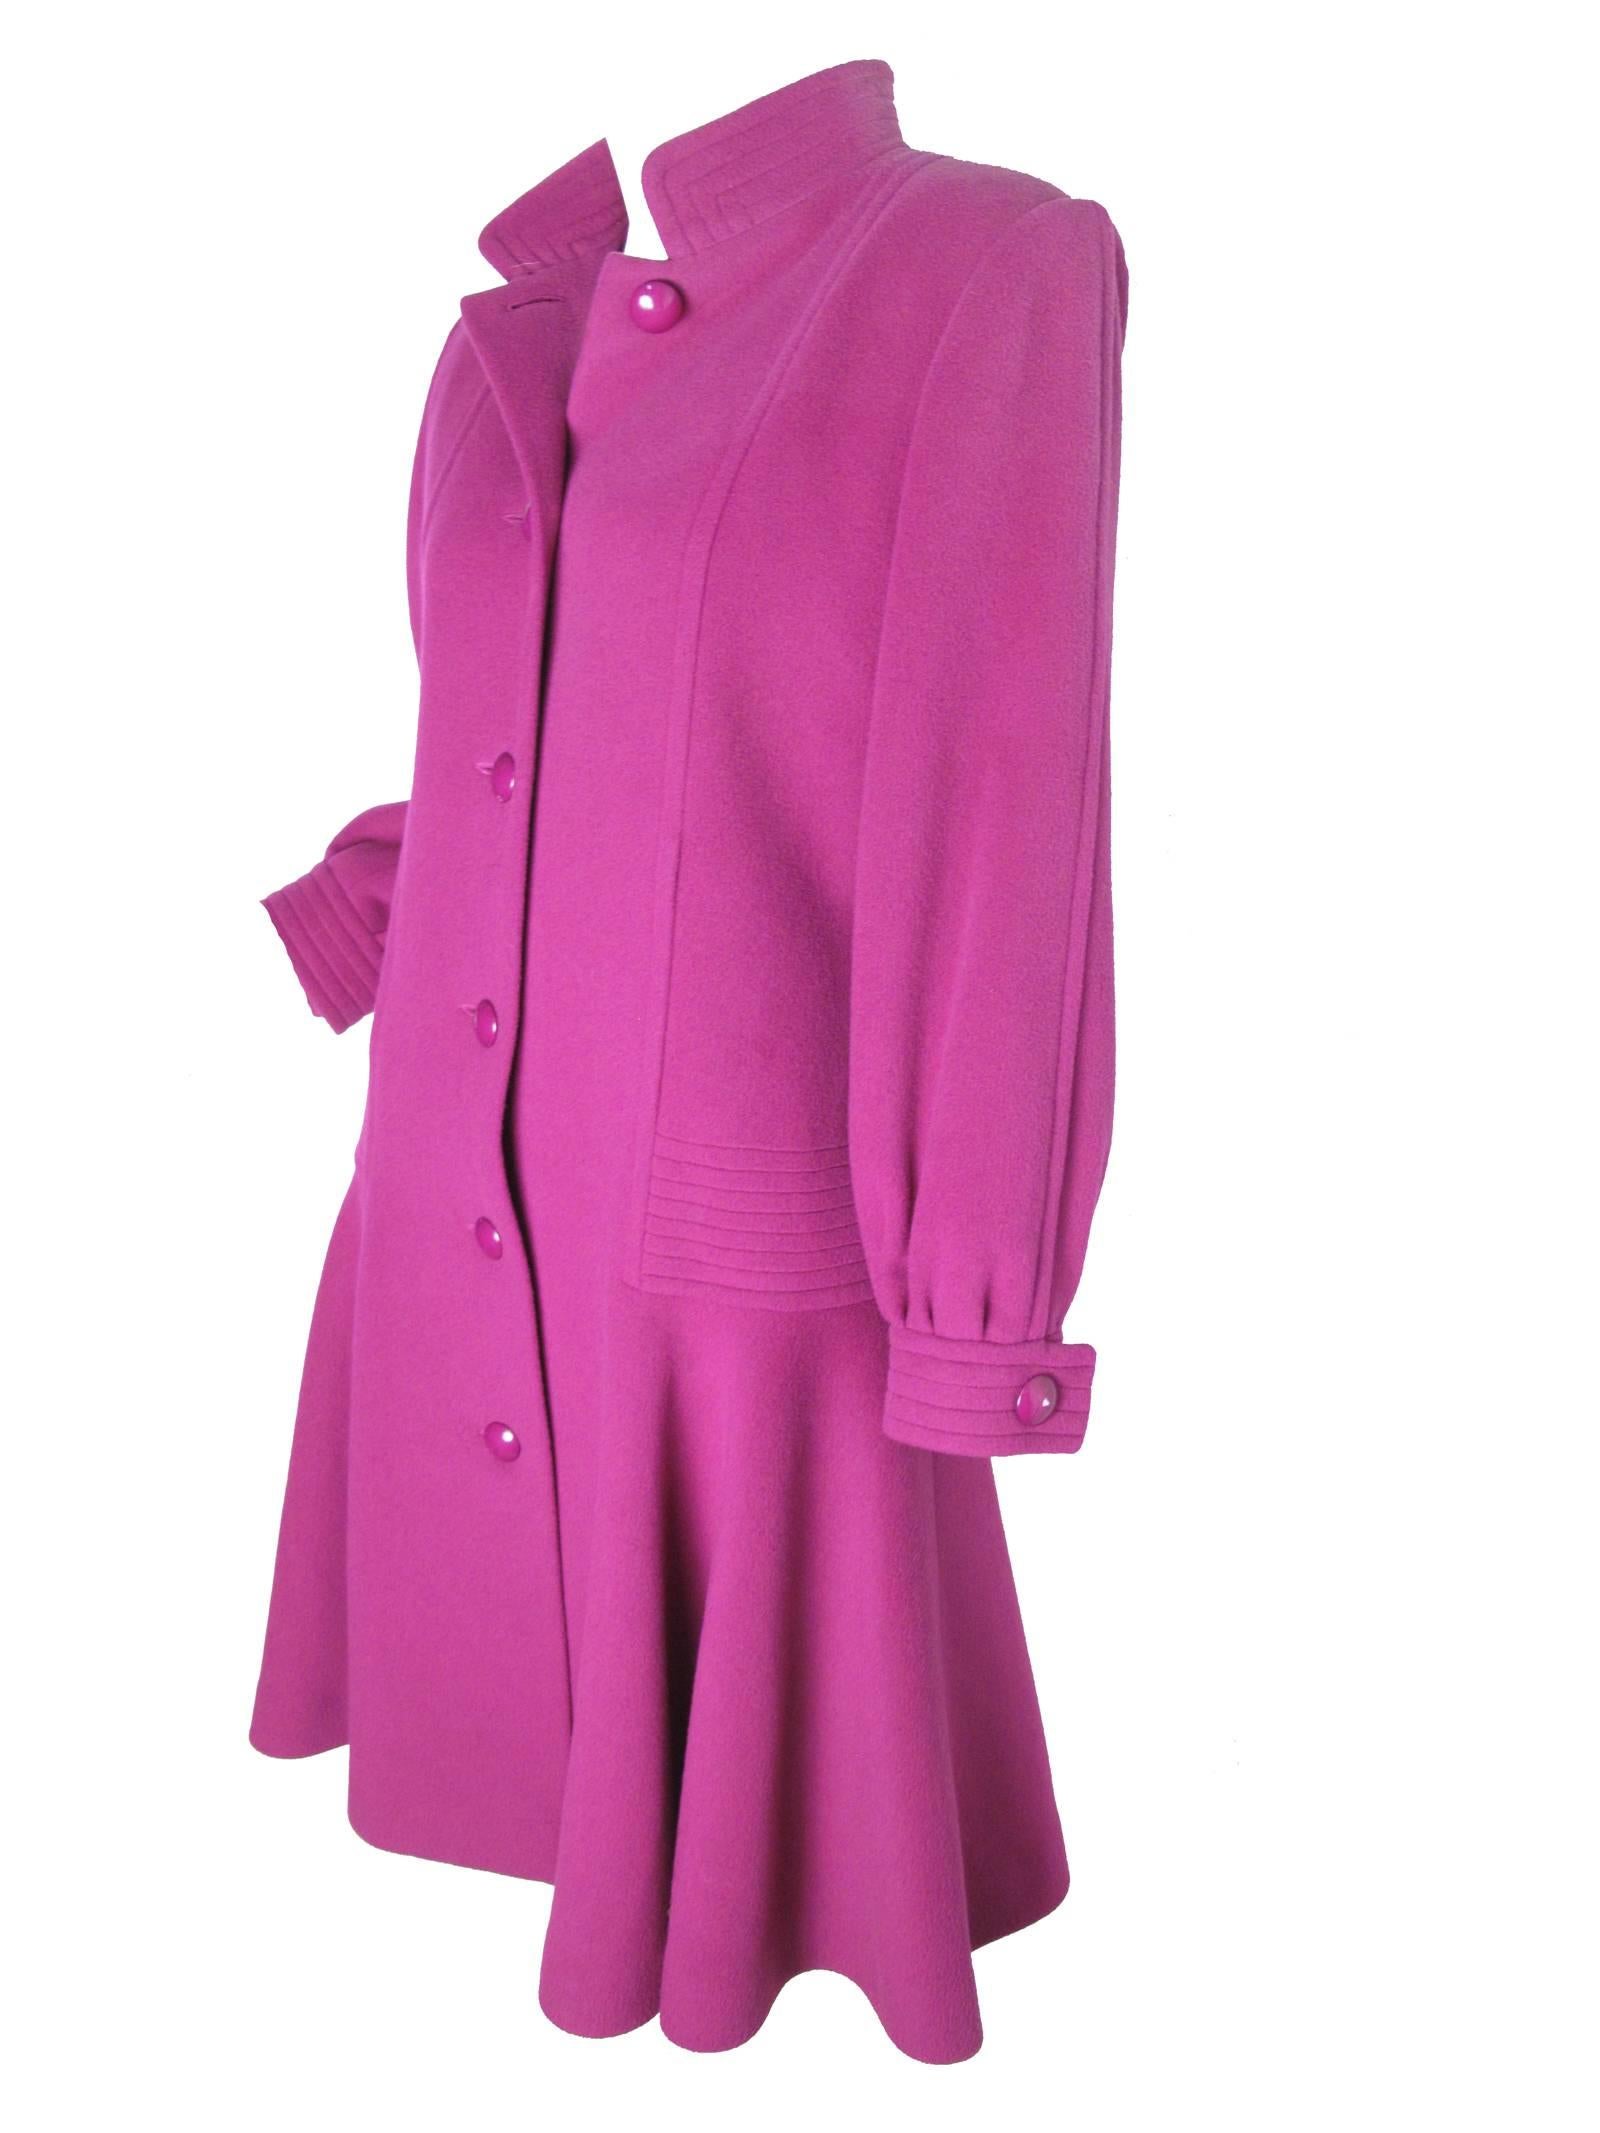 Nina Ricci purple wool coat.  Condition: Excellent . Size 8
We accept returns for refund, please see our terms.  We offer free ground shipping within the US.  Please let us know if you have any questions. 
